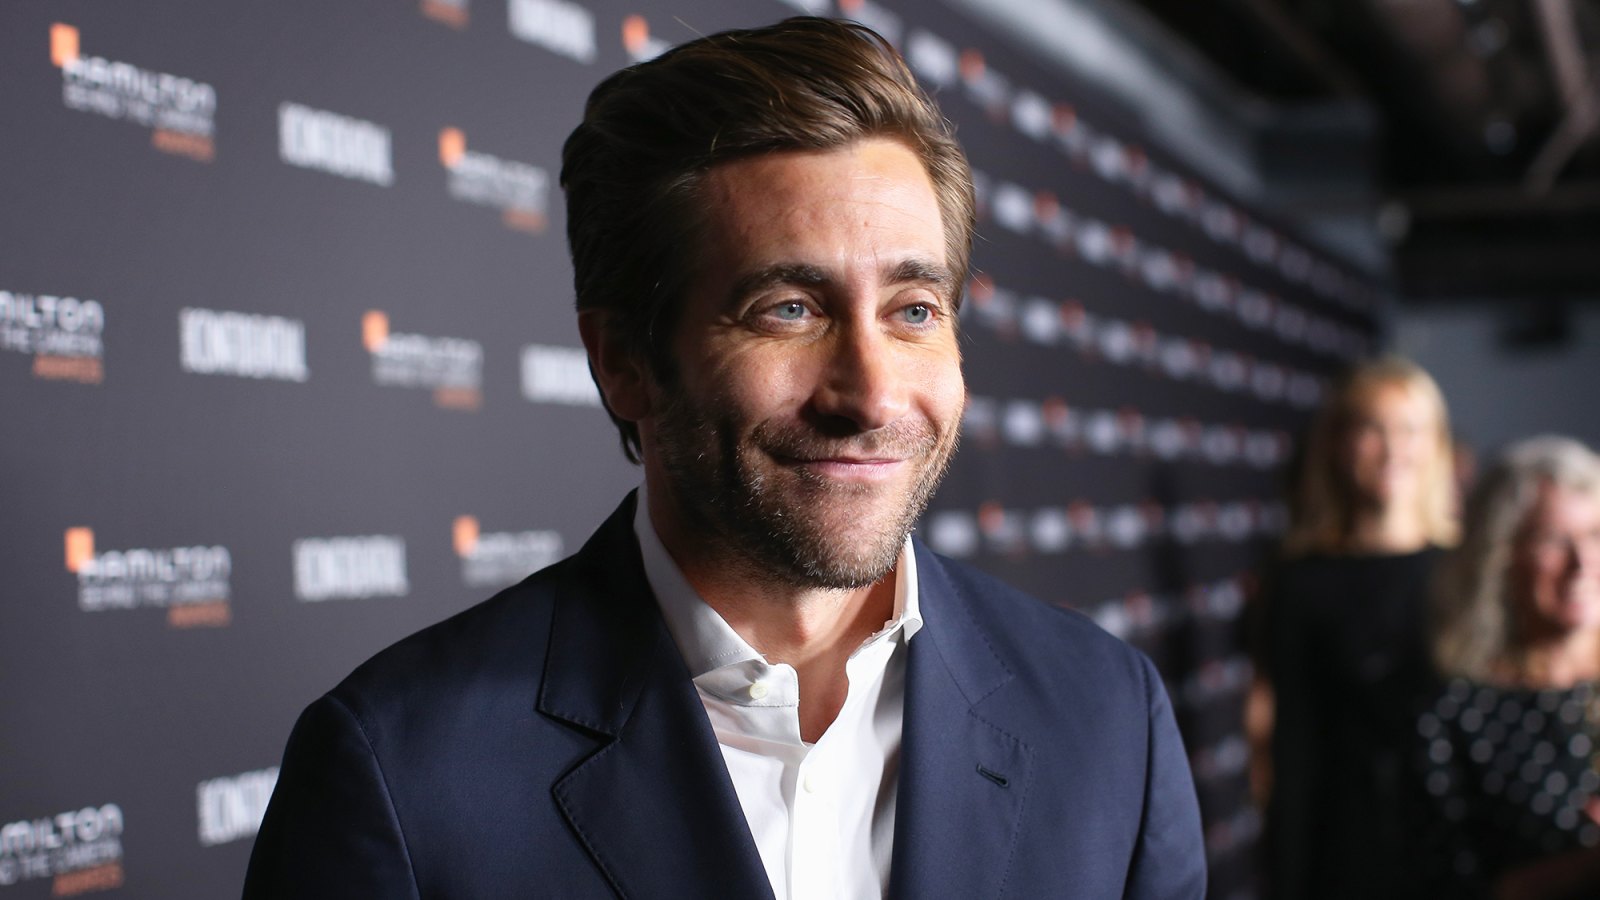 Jake Gyllenhaal Jokes He Just Found Out He's Not PLaying SpiderMan As He Makes His Instagram Debut